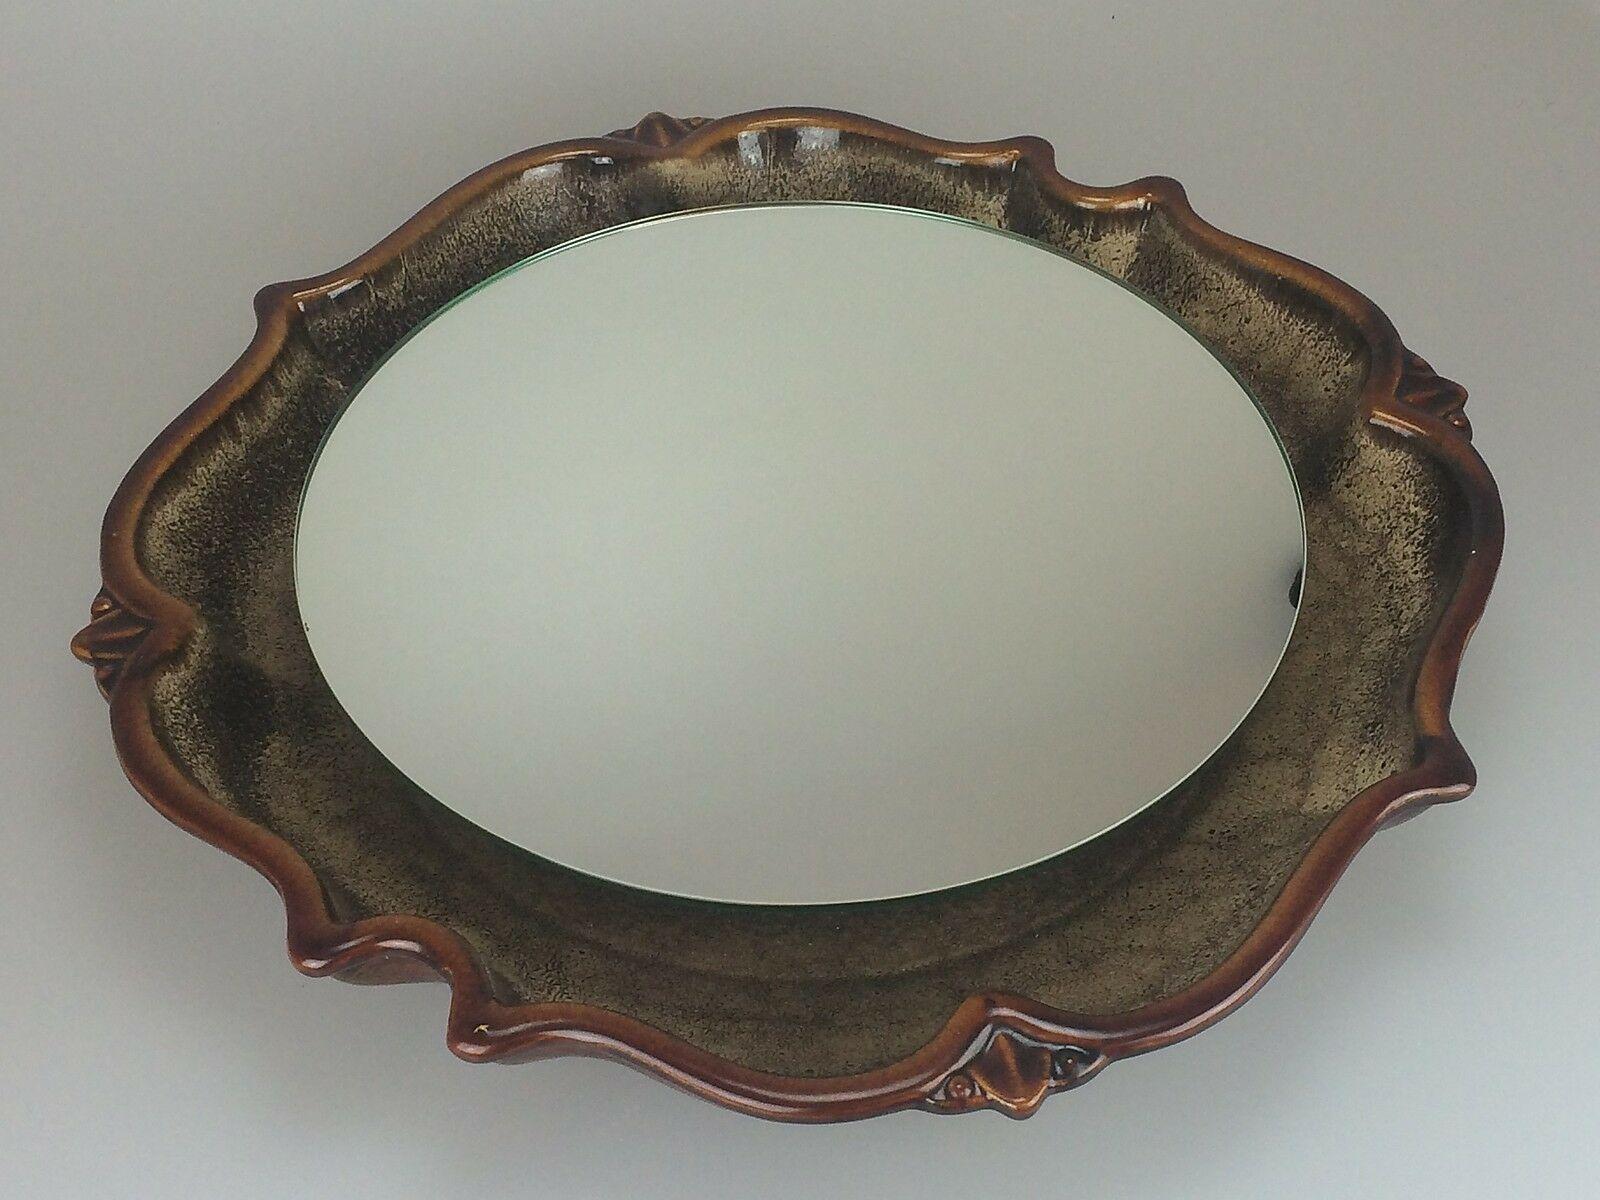 70's Mirror wall mirror ceramic pan illuminated Space Age design

Object: wall mirror

Manufacturer: Pan

Condition: good

Age: around 1960-1970

Dimensions:

Diameter = 52cm
Height = 7.5cm

Other notes:

The pictures serve as part